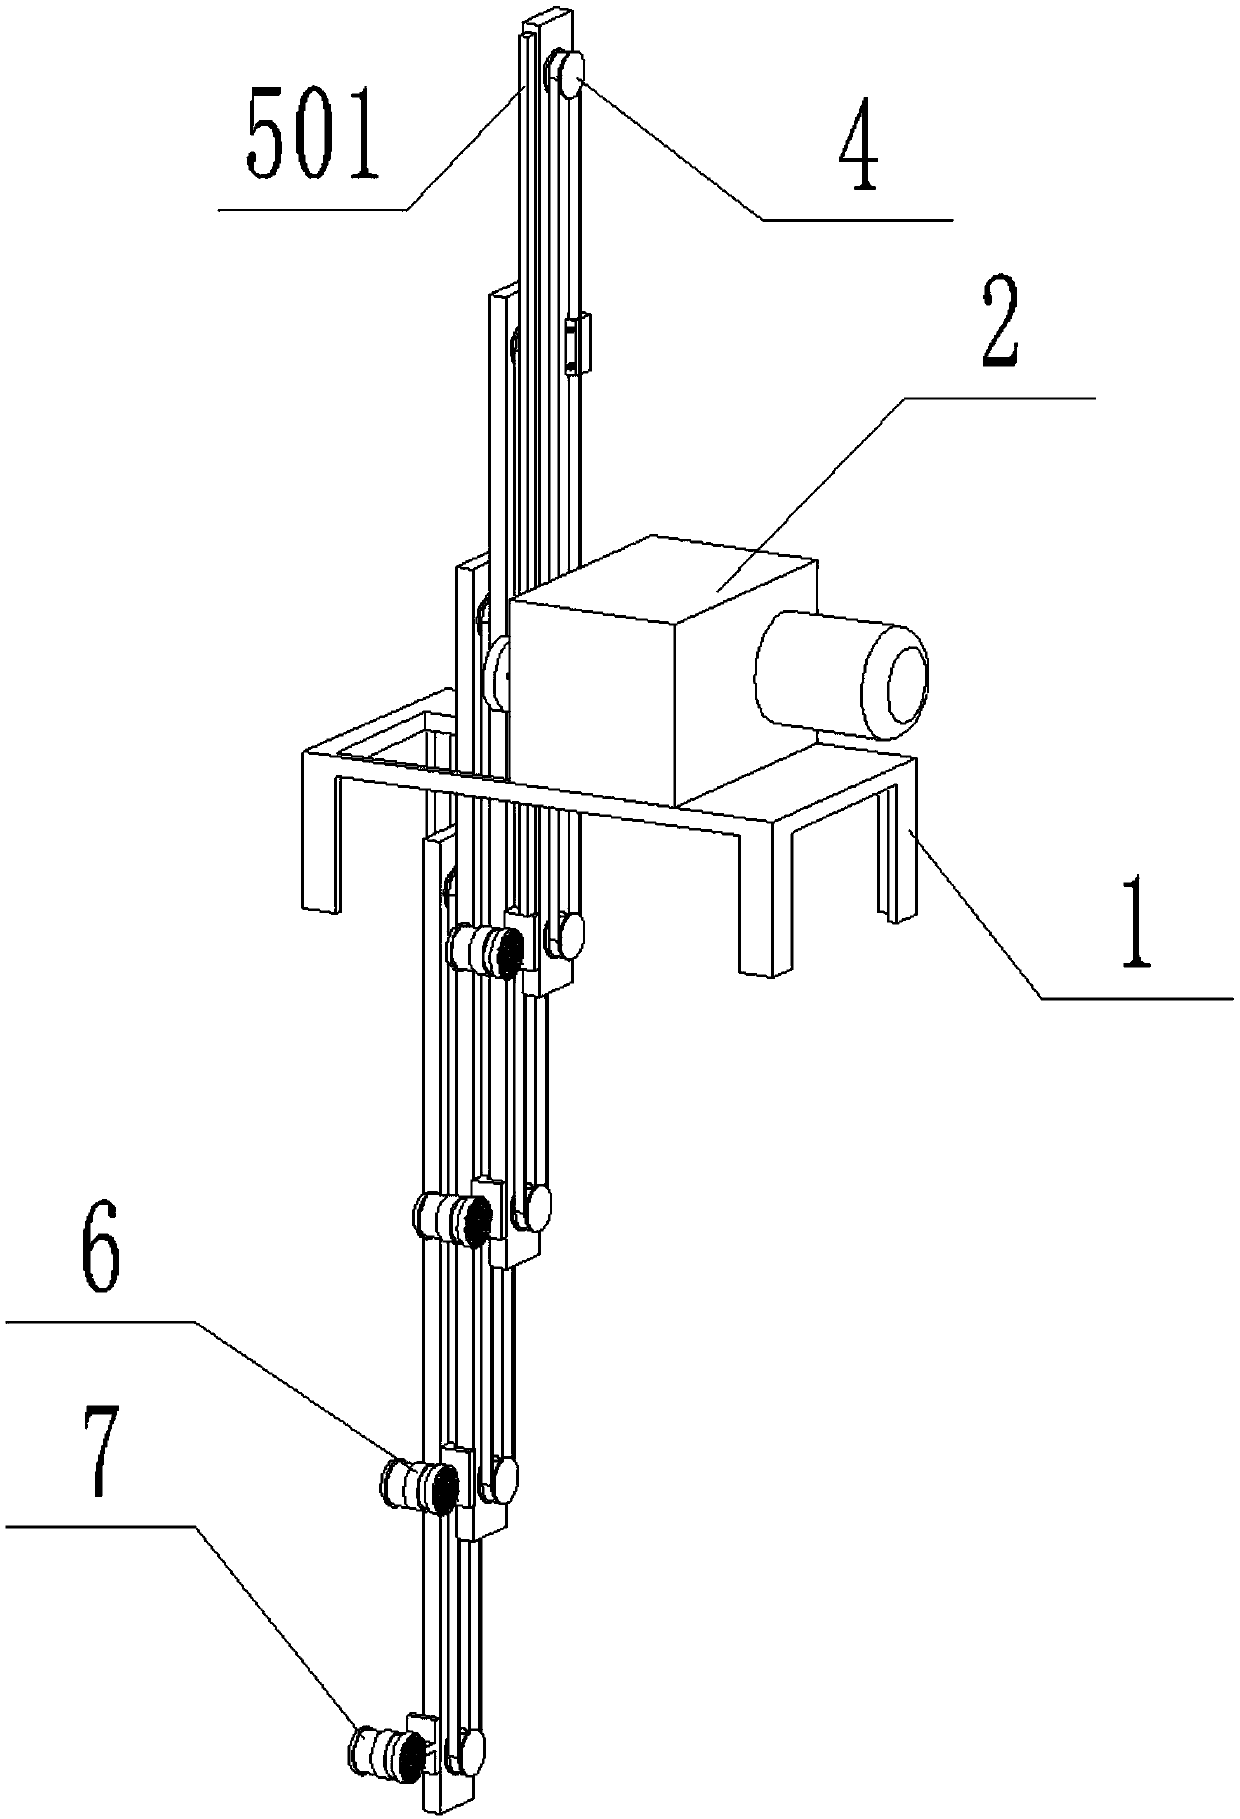 Adjustable depth sampling frame structure for environmental engineering water quality monitoring